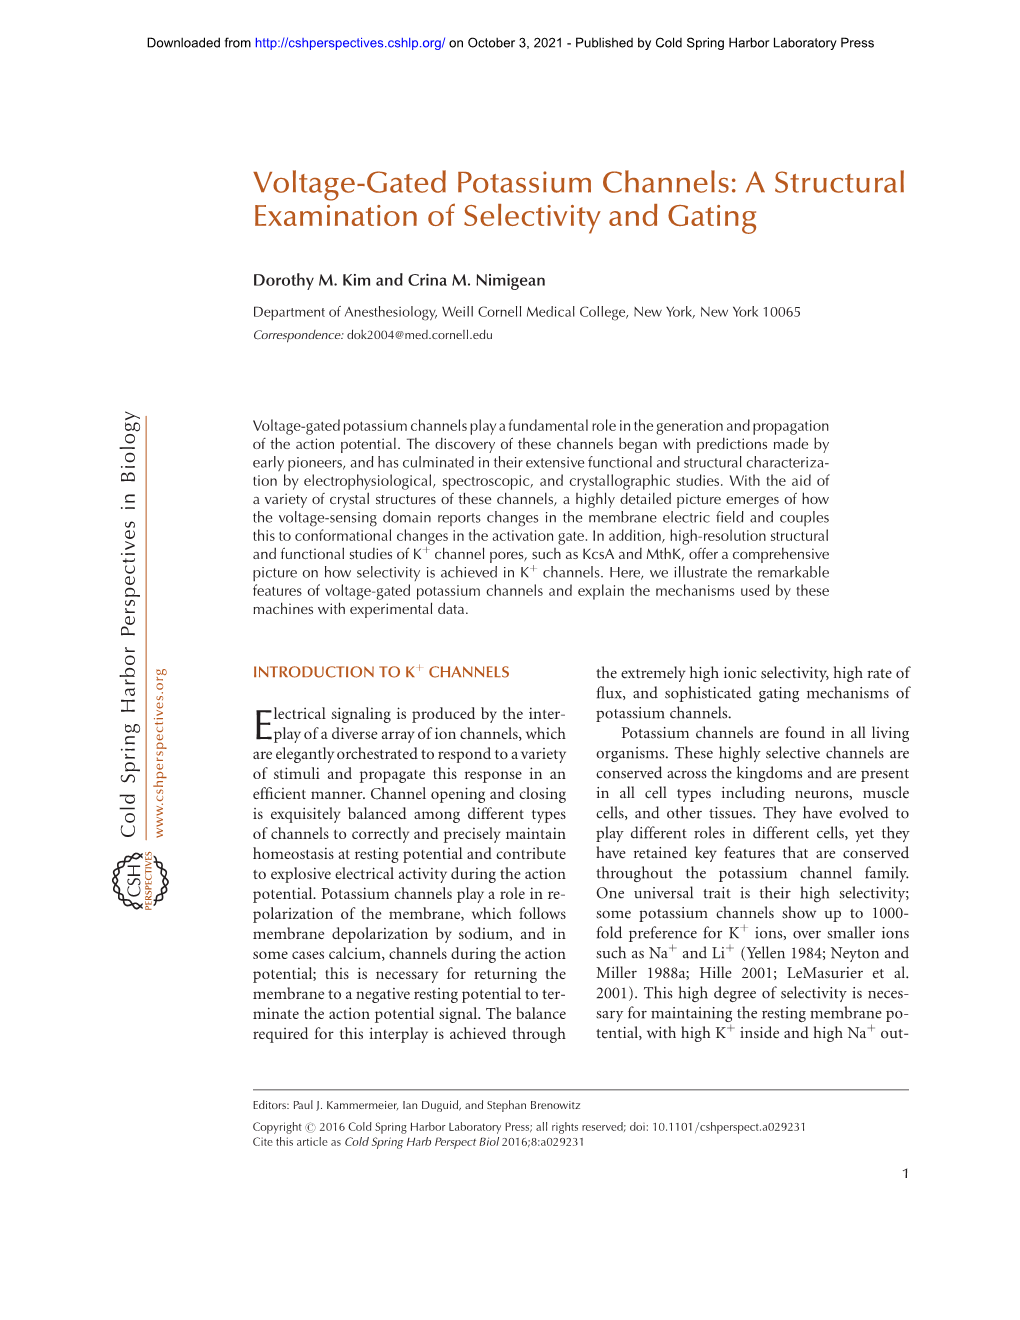 Voltage-Gated Potassium Channels: a Structural Examination of Selectivity and Gating